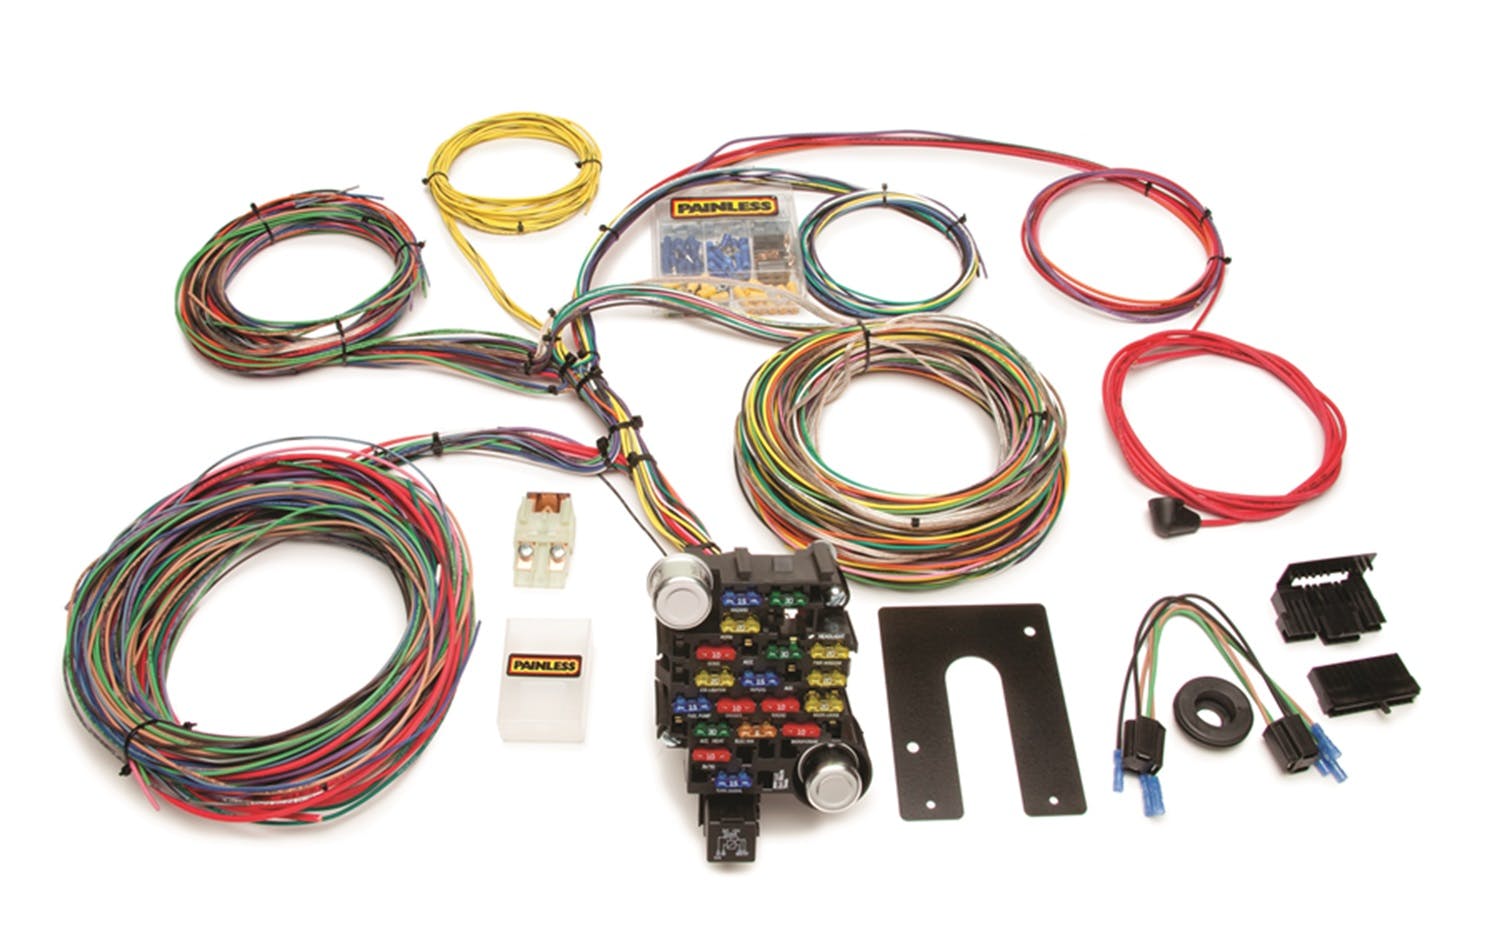 Painless 10202 Chassis Wiring Harness